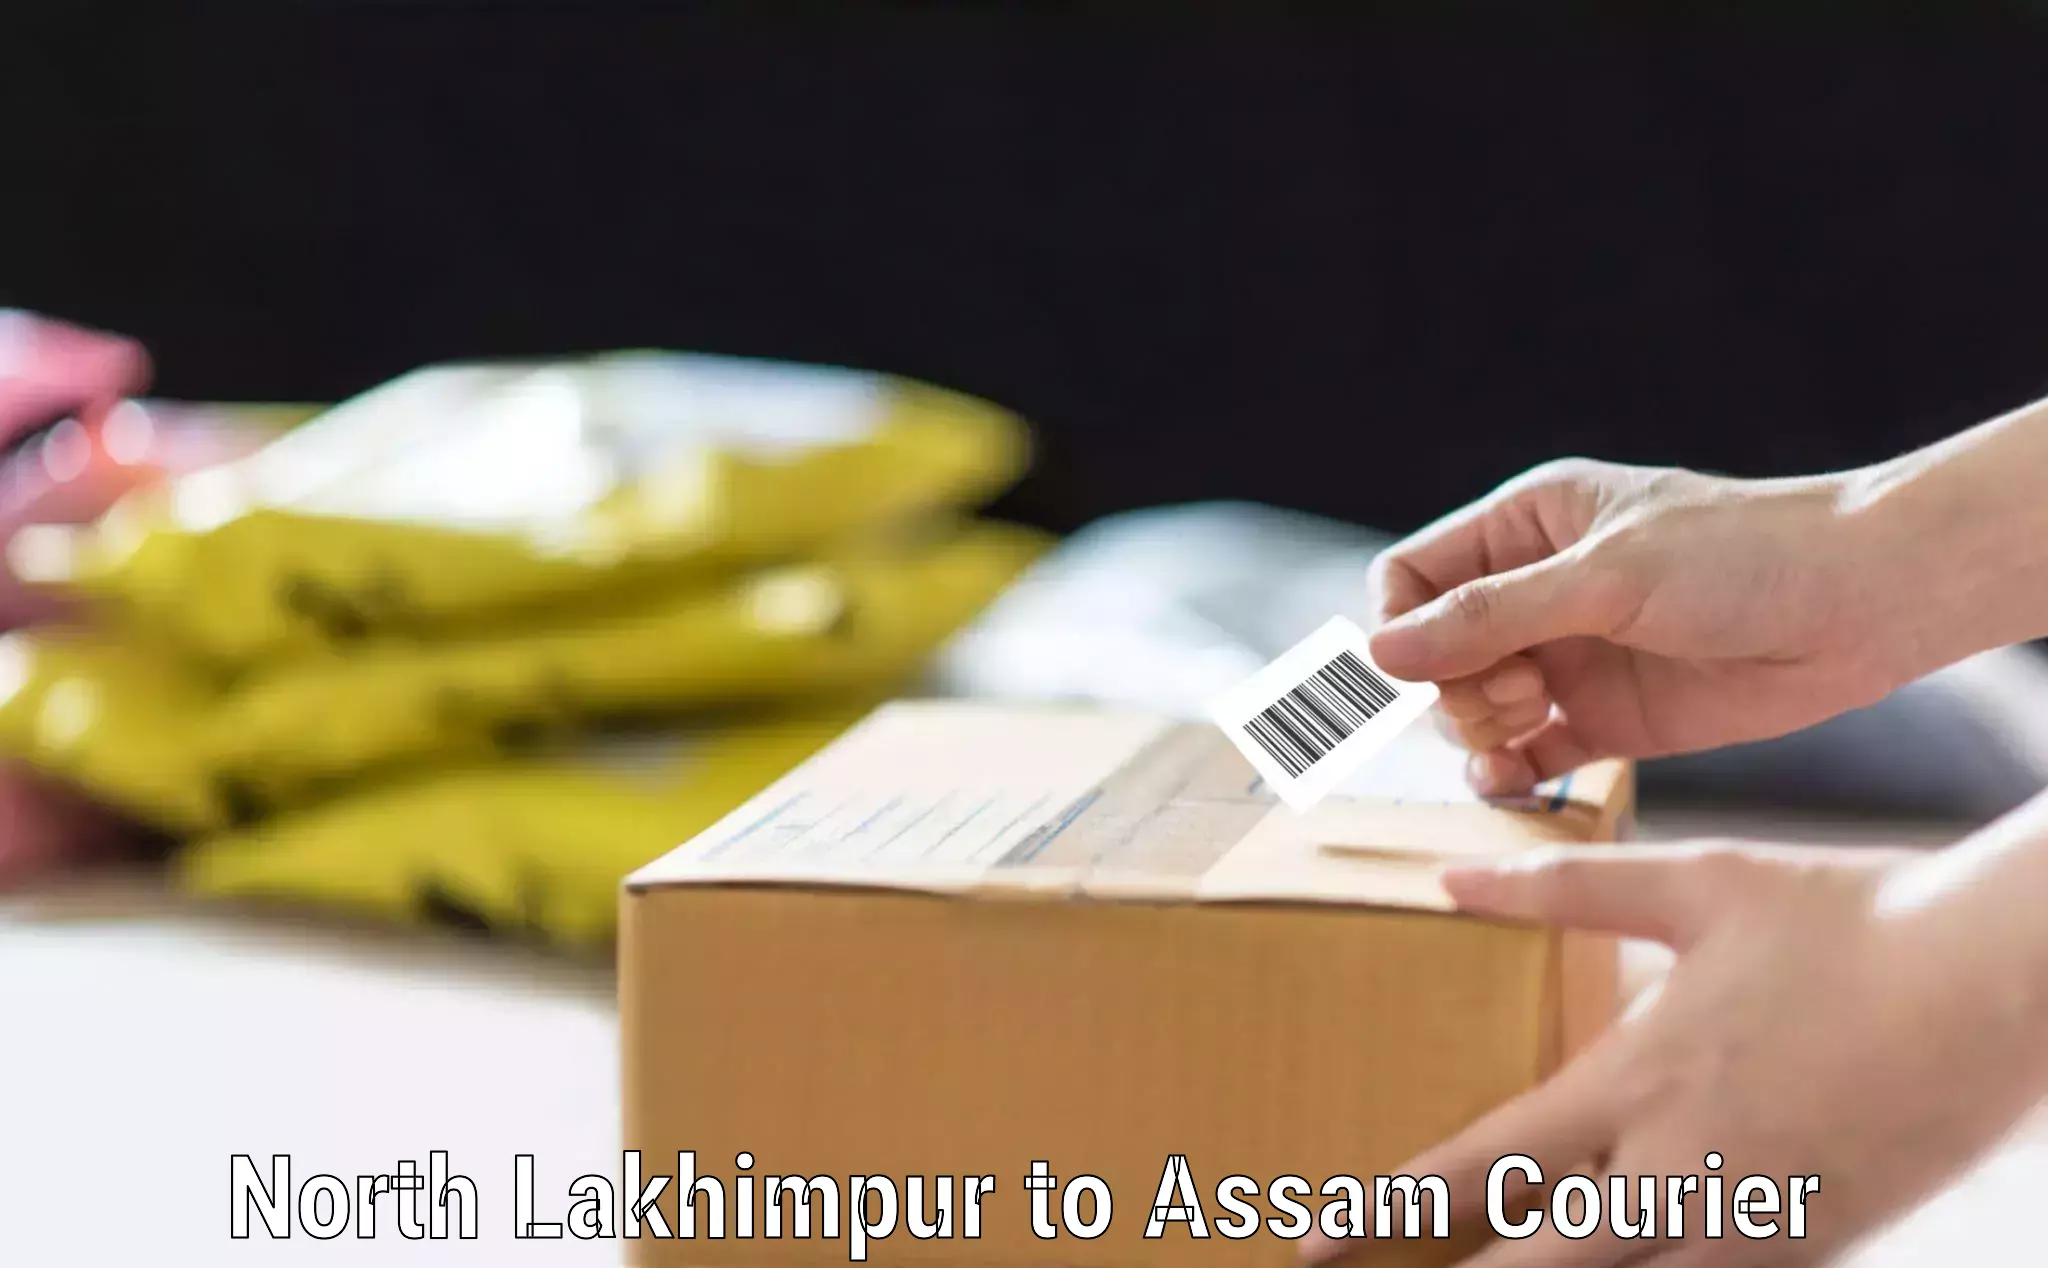 Doorstep luggage collection North Lakhimpur to Dima Hasao